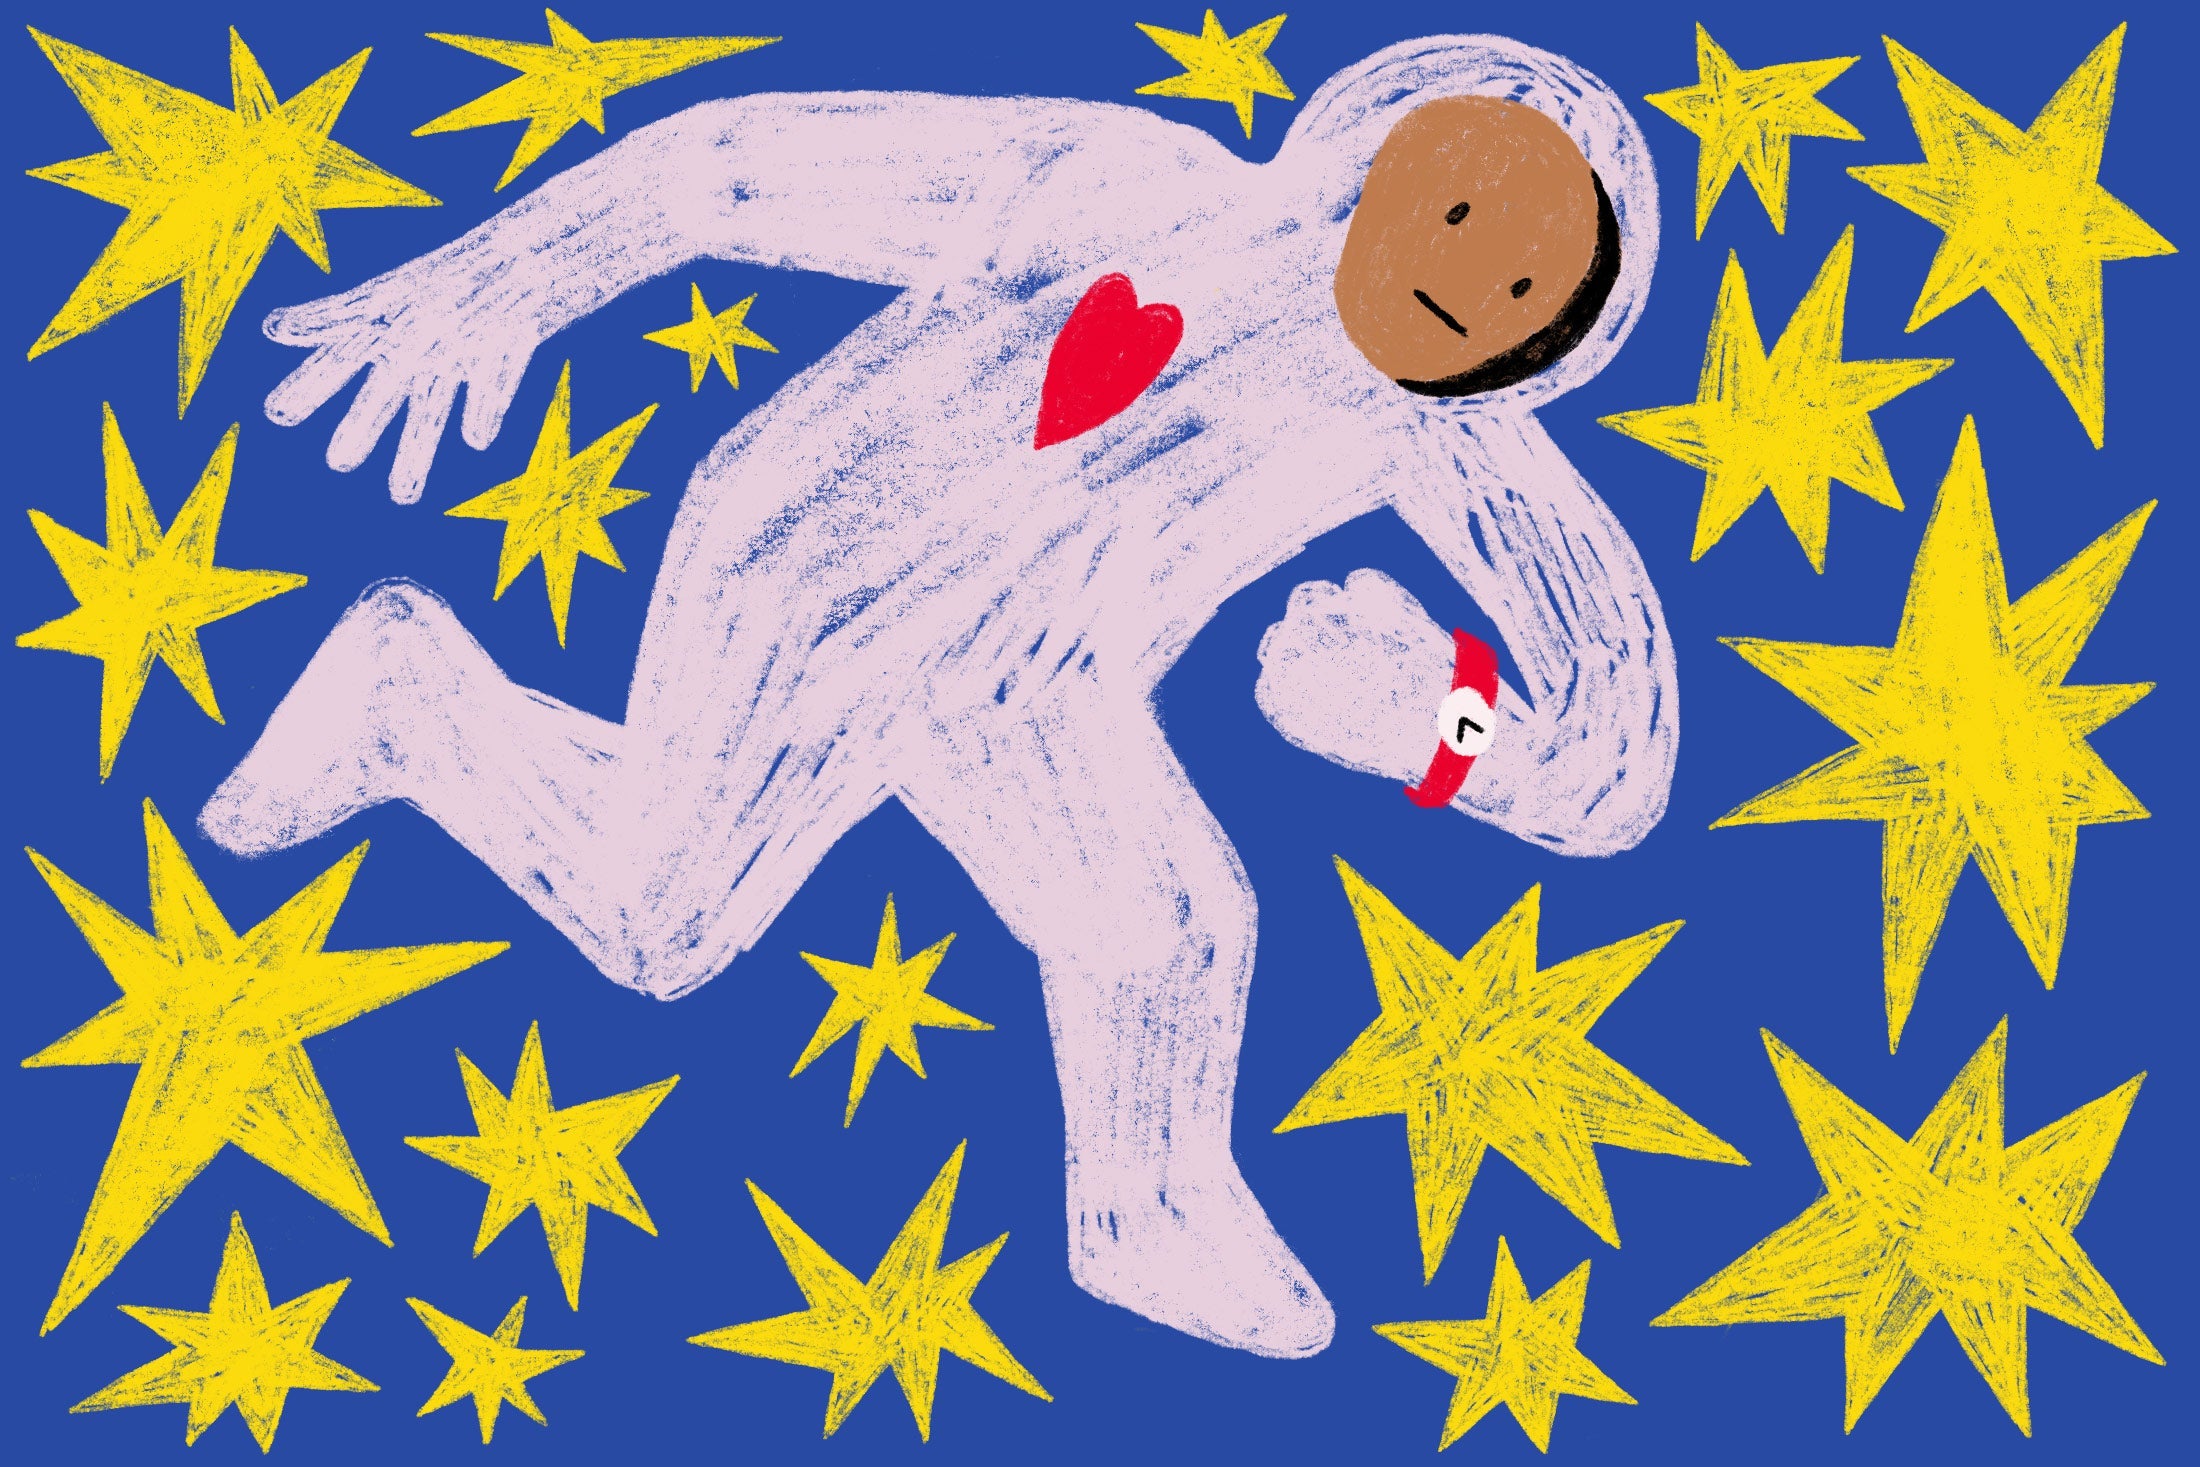 Person in a spacesuit looking at a watch while surrounded by stars, inspired by Matisse's Icarus.